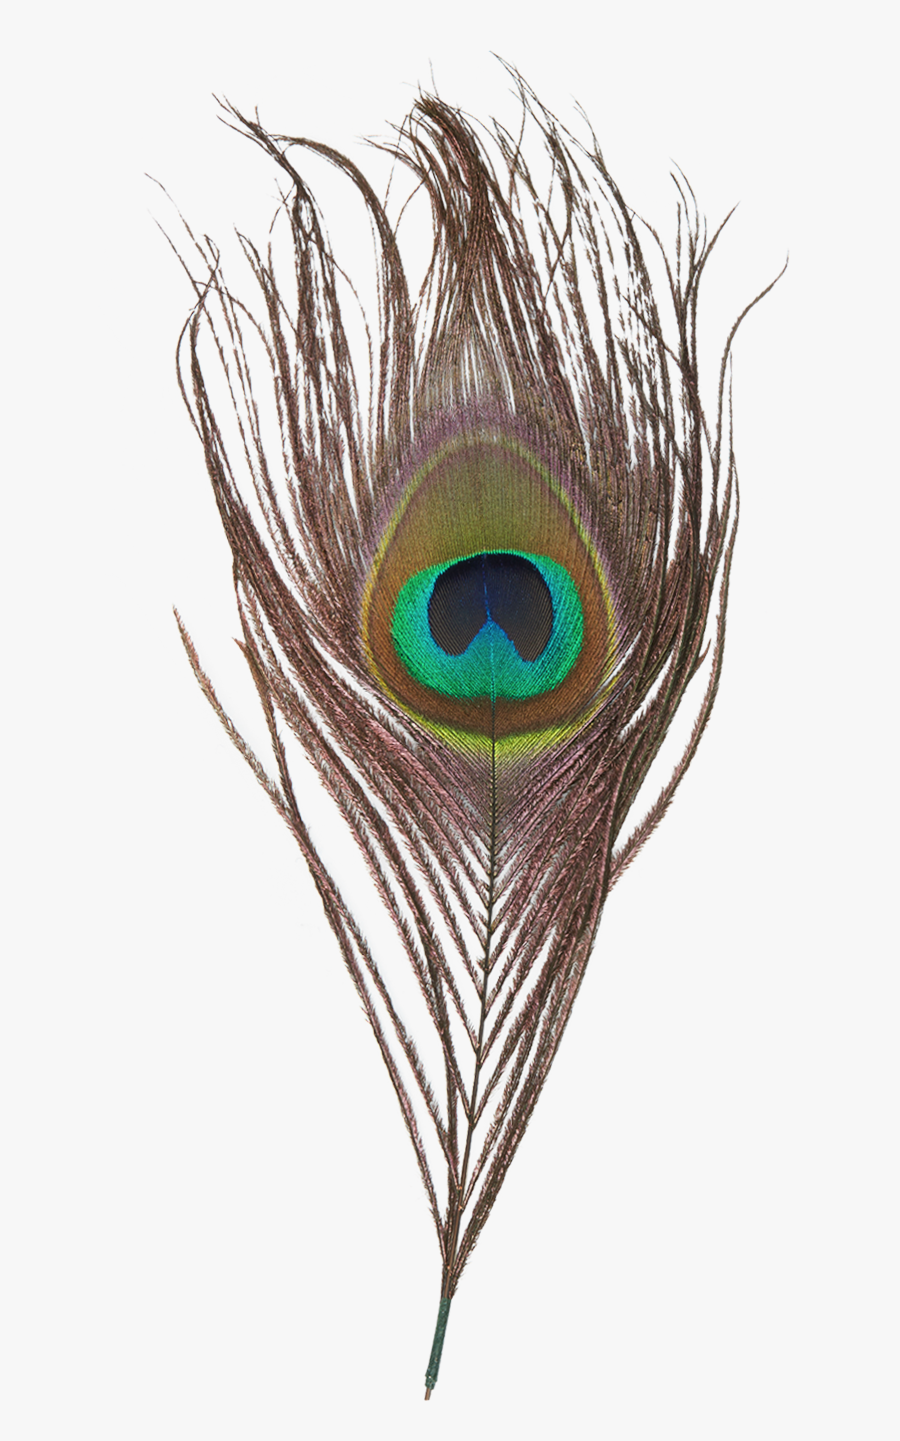 900x1441 Peacock Feather Png Transparent Image Peacock Feather Image Png Free Transparent Clipart